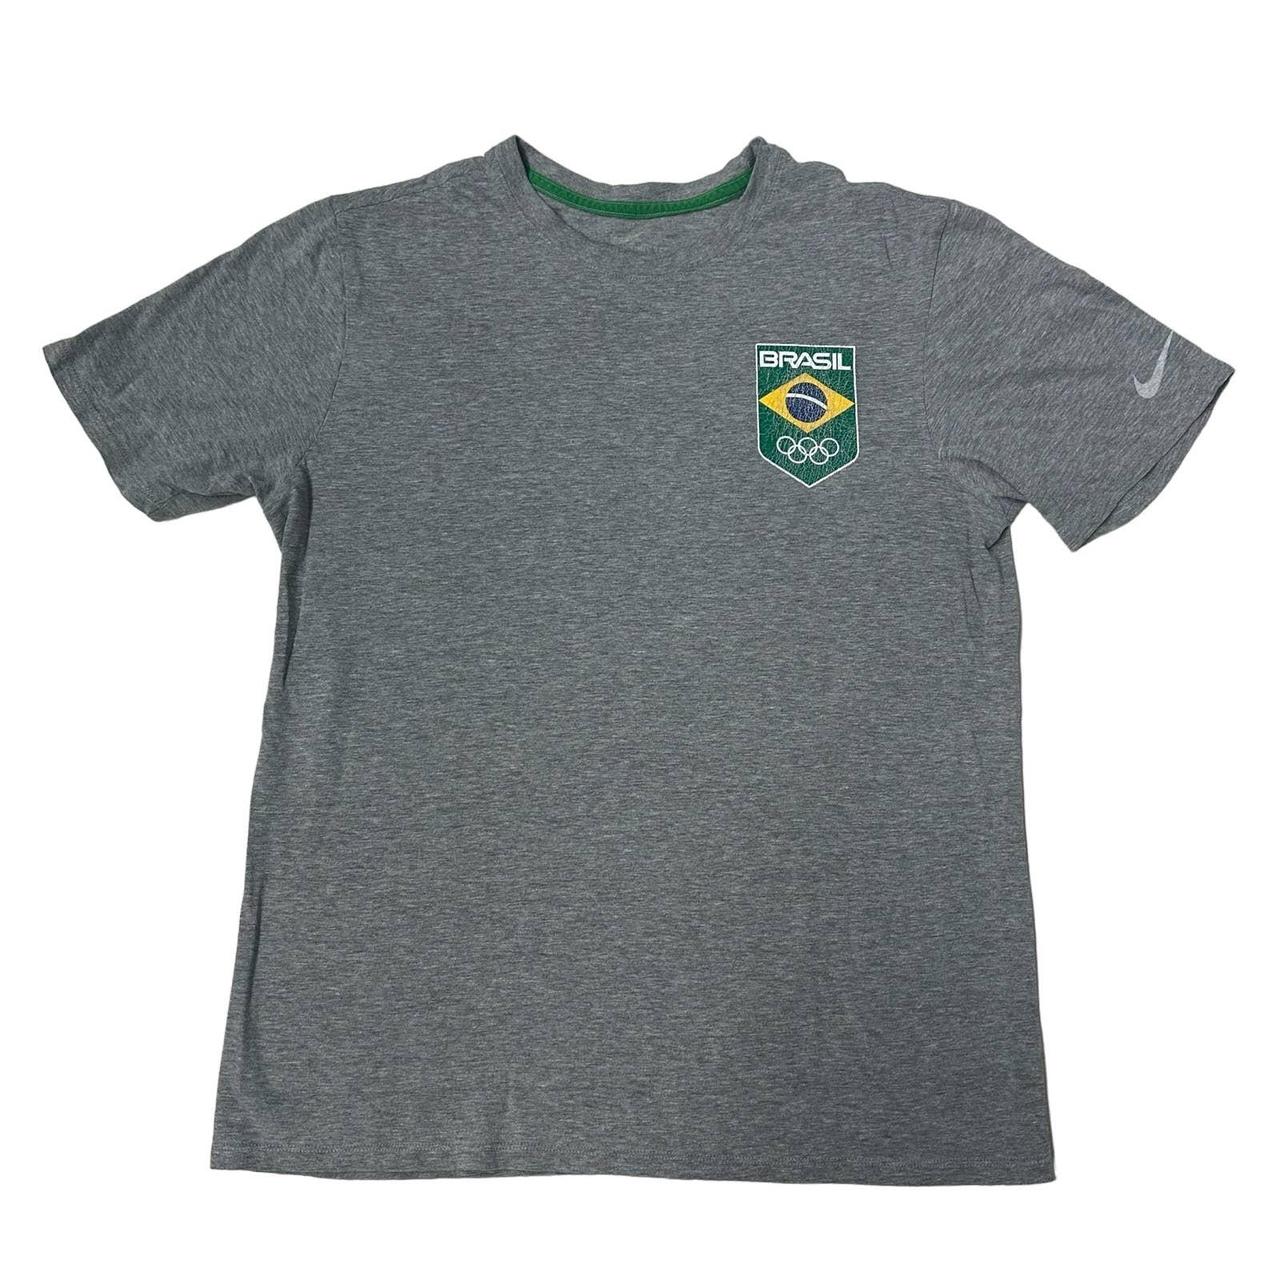 Nike Women's Grey and Green Blouse